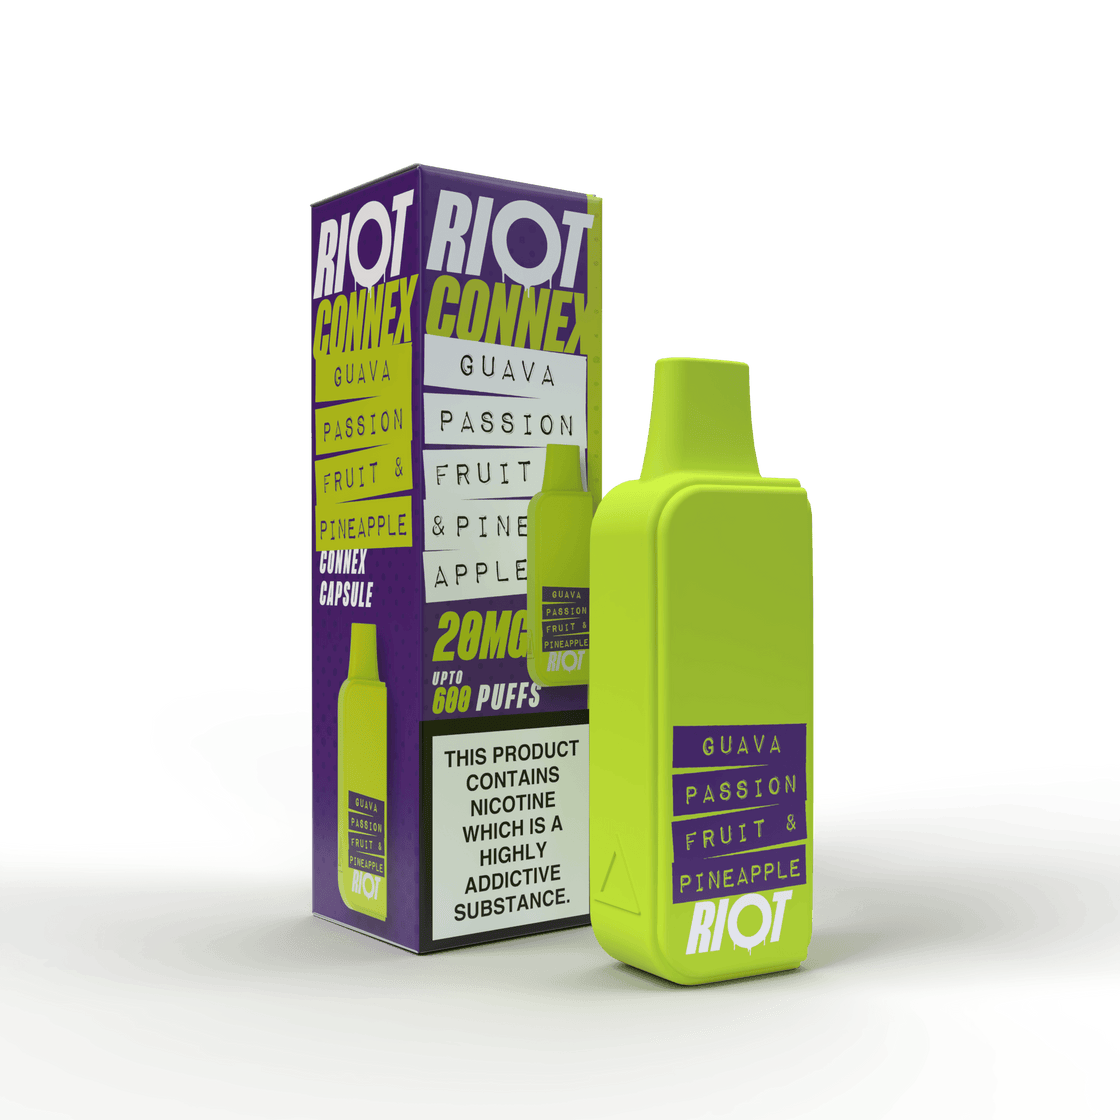 GUAVA PASSION FRUIT & PINEAPPLE - RIOT CONNEX - PRE-FILLED POD - 600 PUFFS BY RIOT SQUAD - Vapeslough